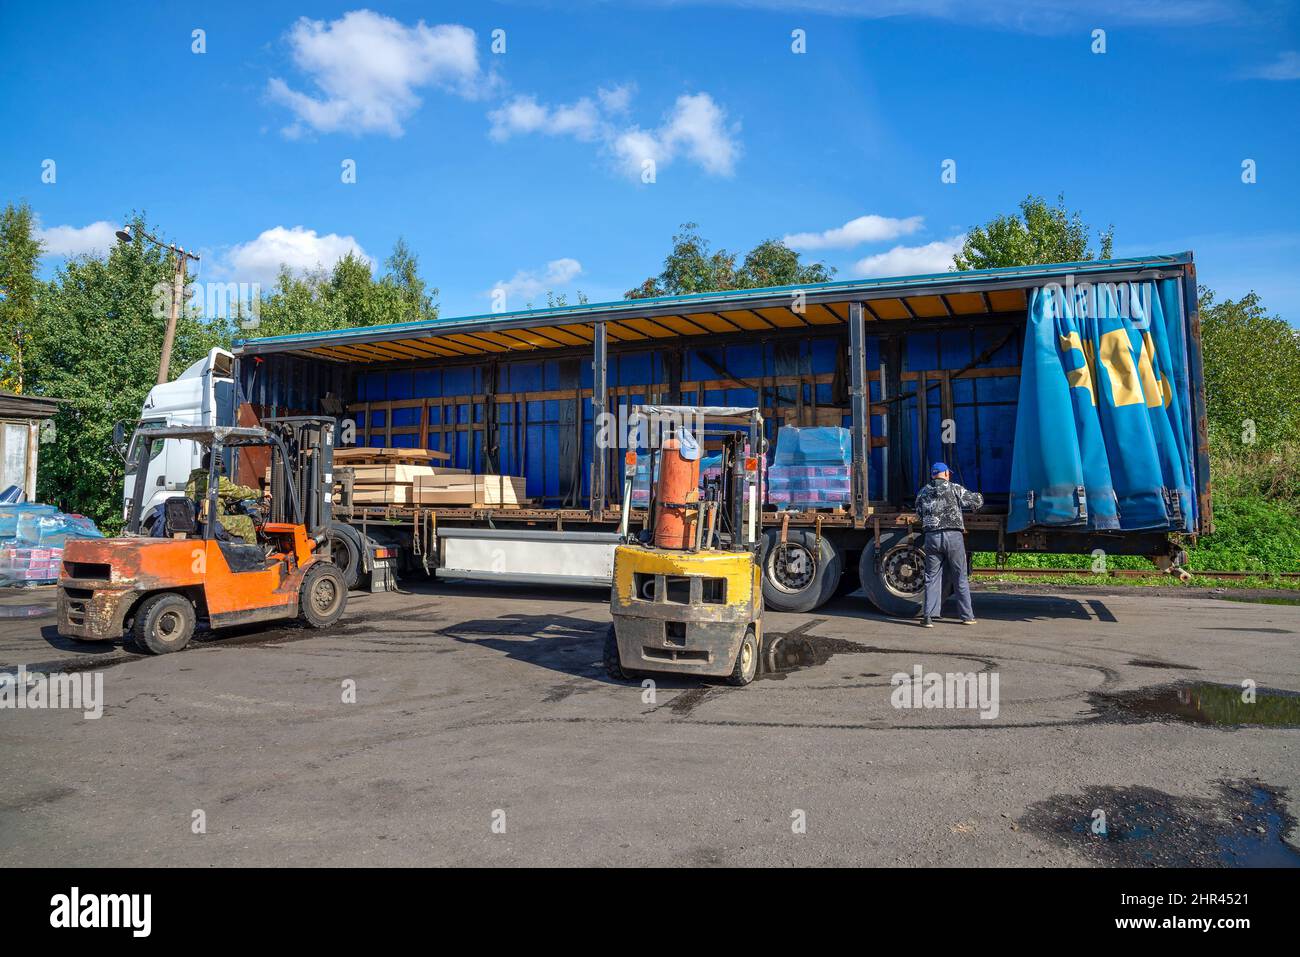 SAINT PETERSBURG, RUSSIA - SEPTEMBER 10, 2021: Loading of a truck with construction materials Stock Photo